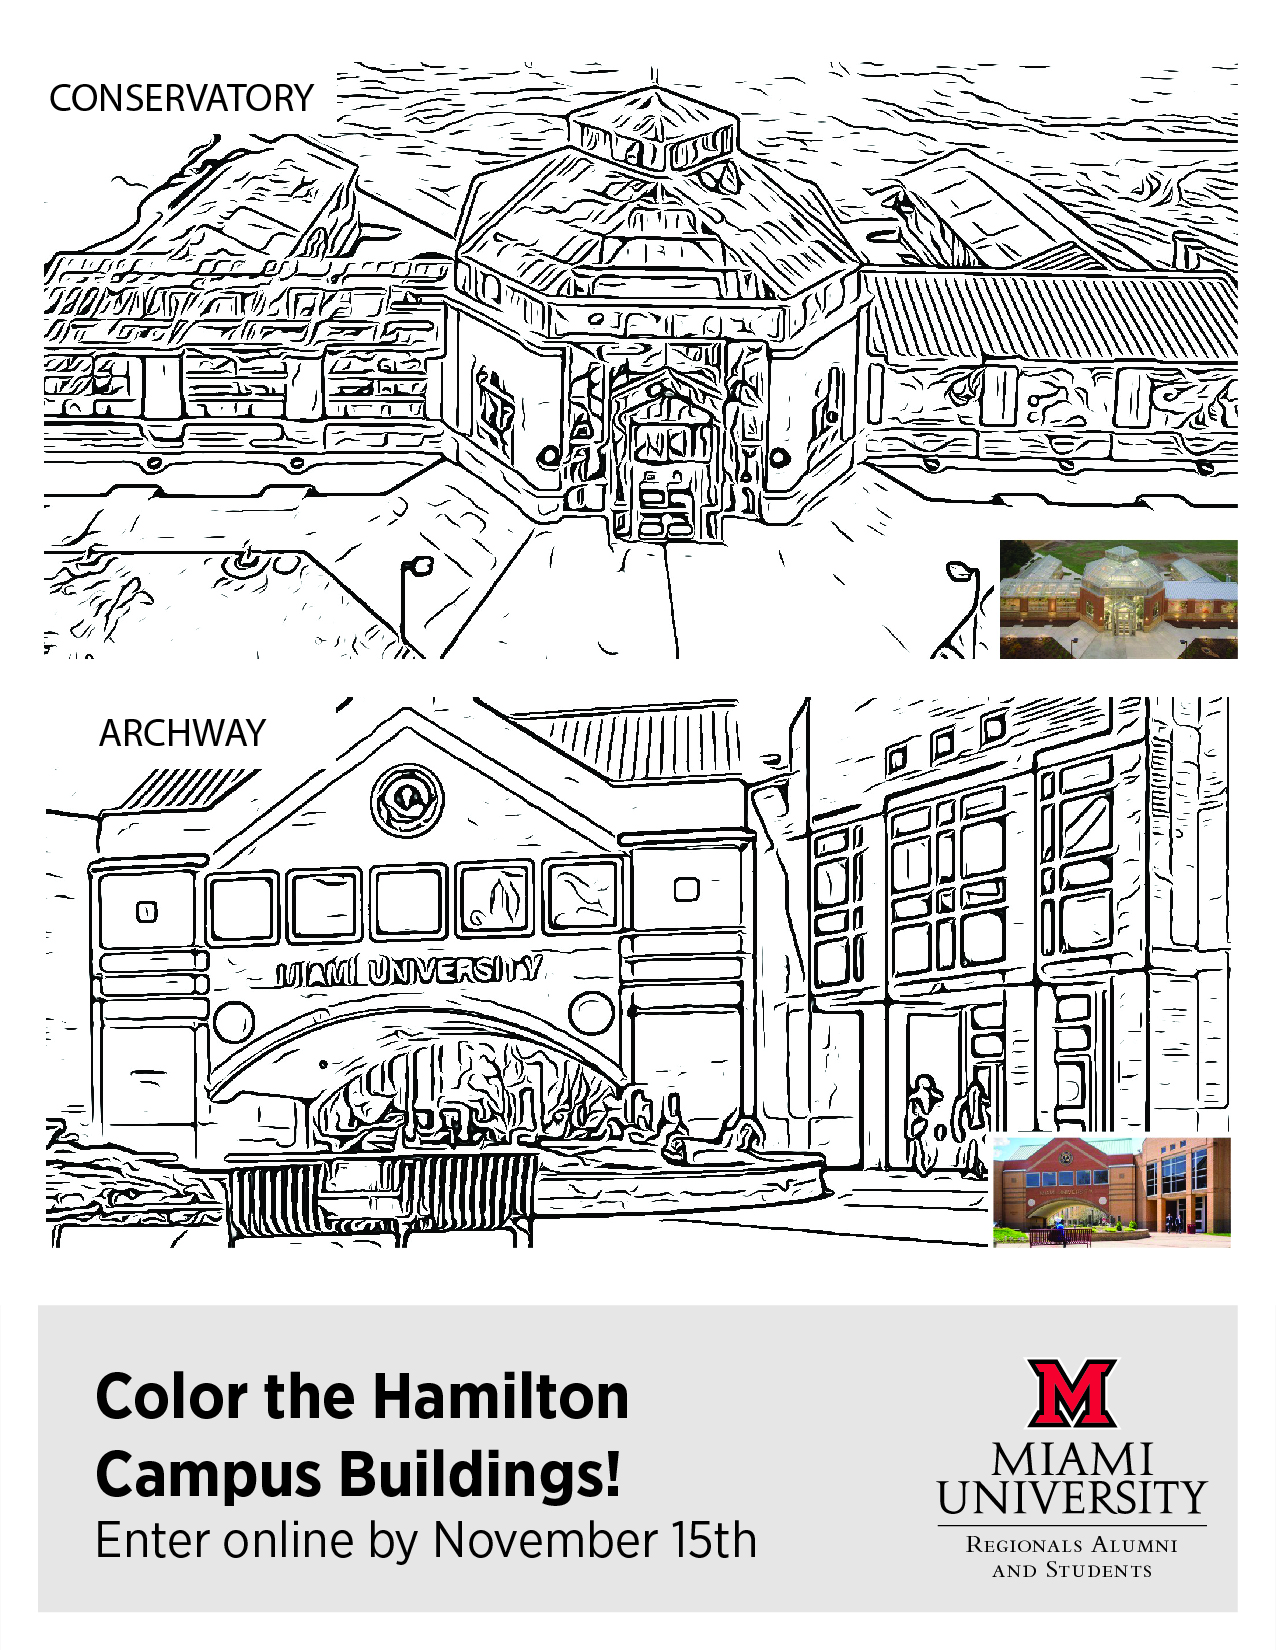 Miami University Hamilton campus Conservatory and Wilks Conference Center buildings.